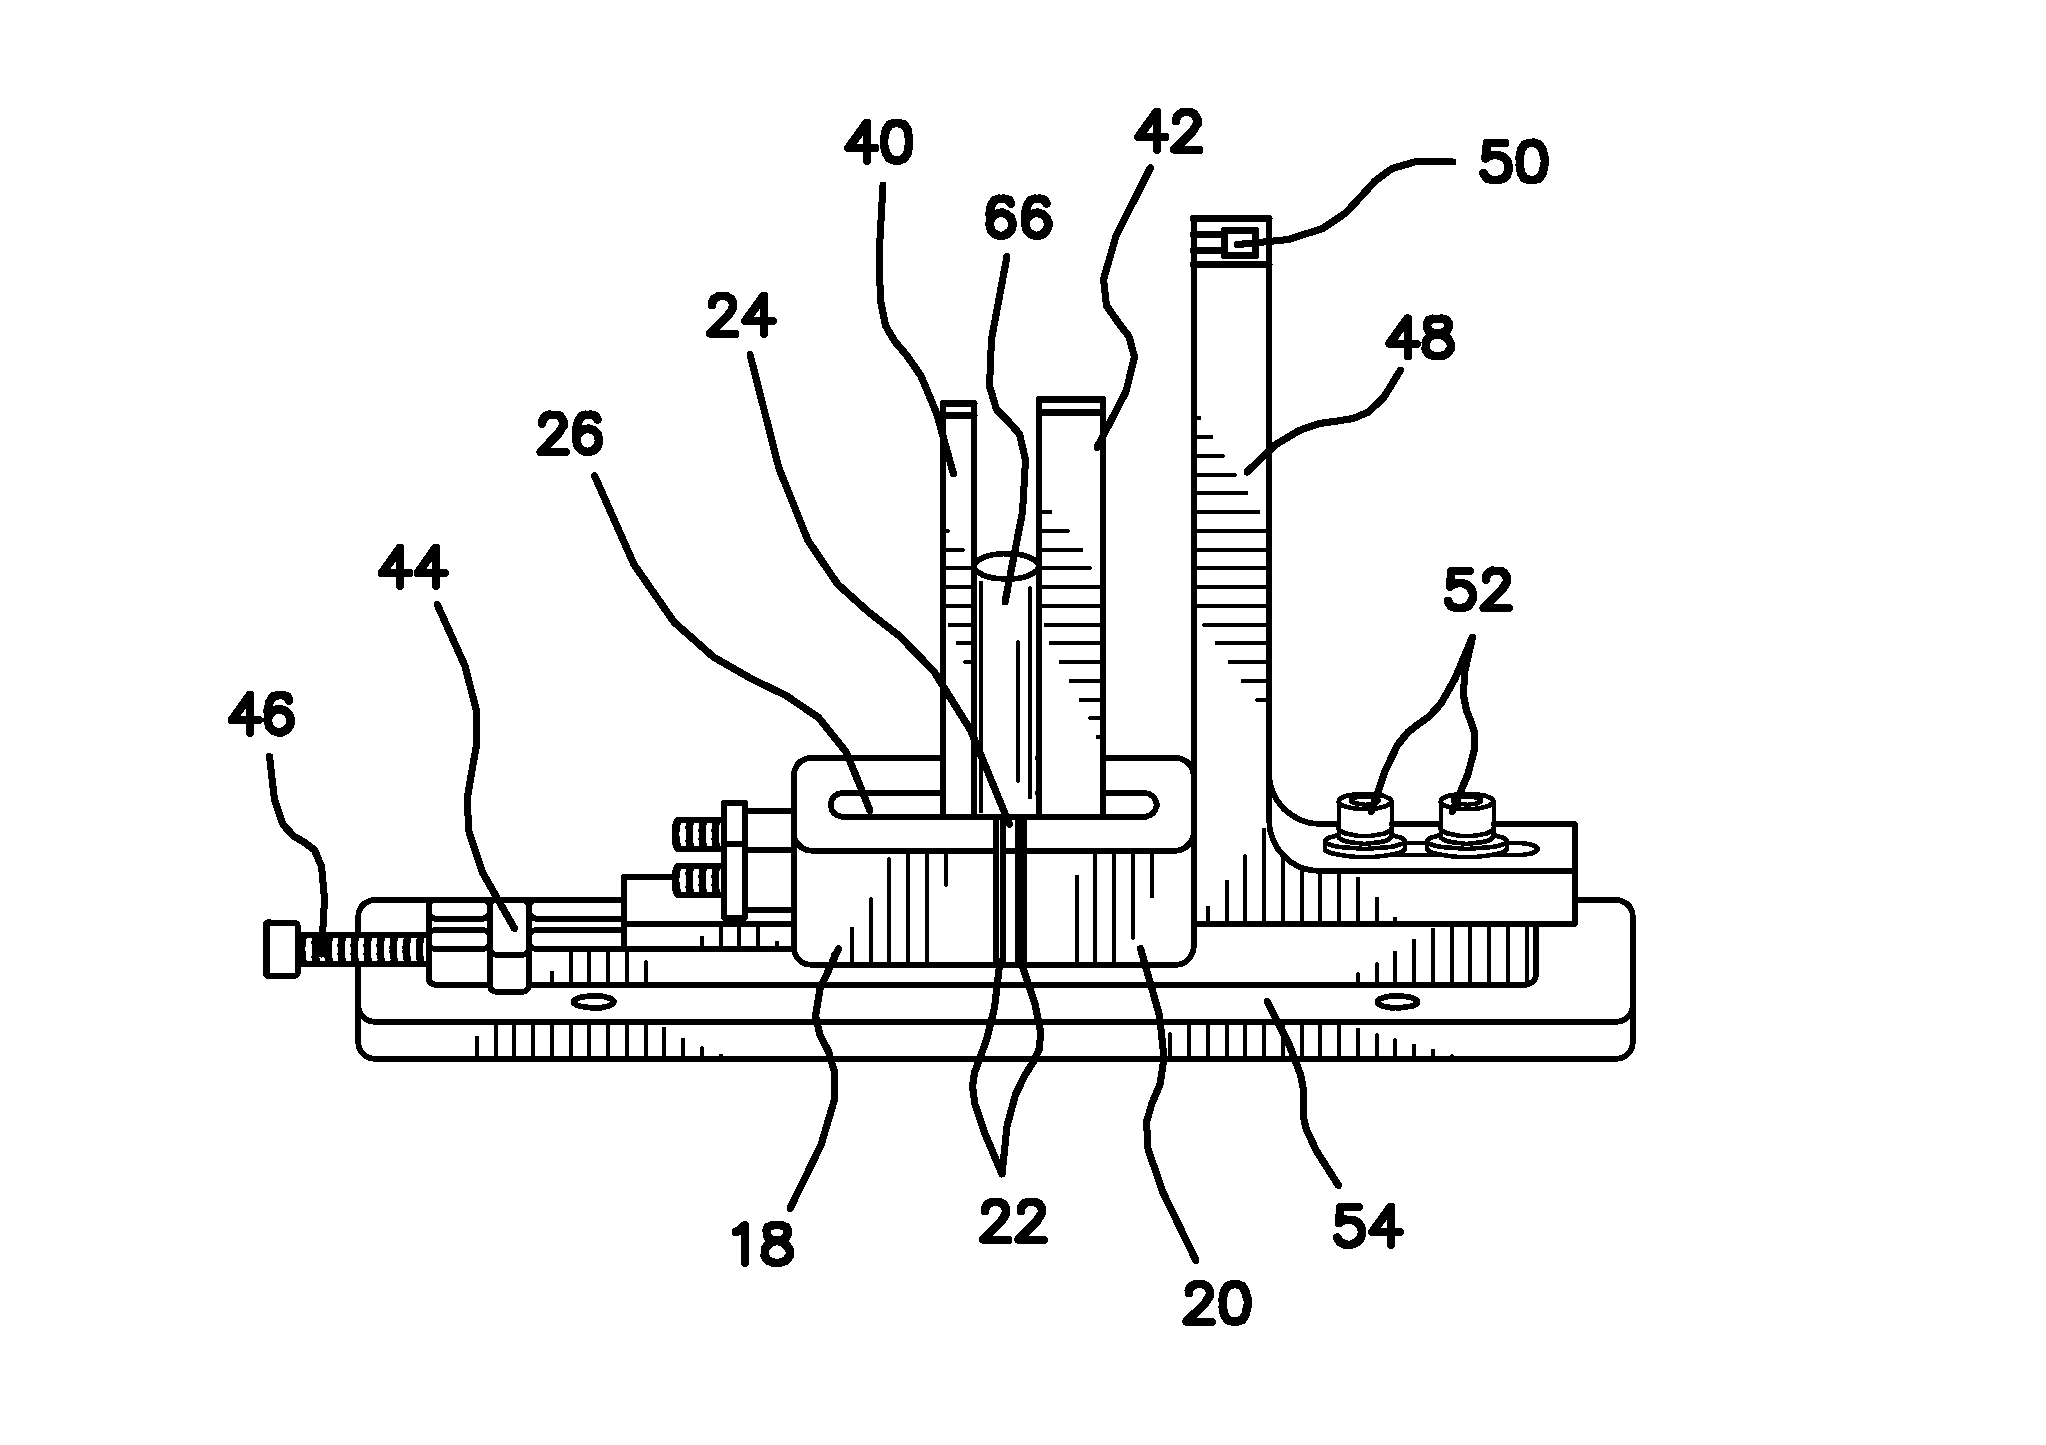 Apparatus and method for cutting costal cartilage